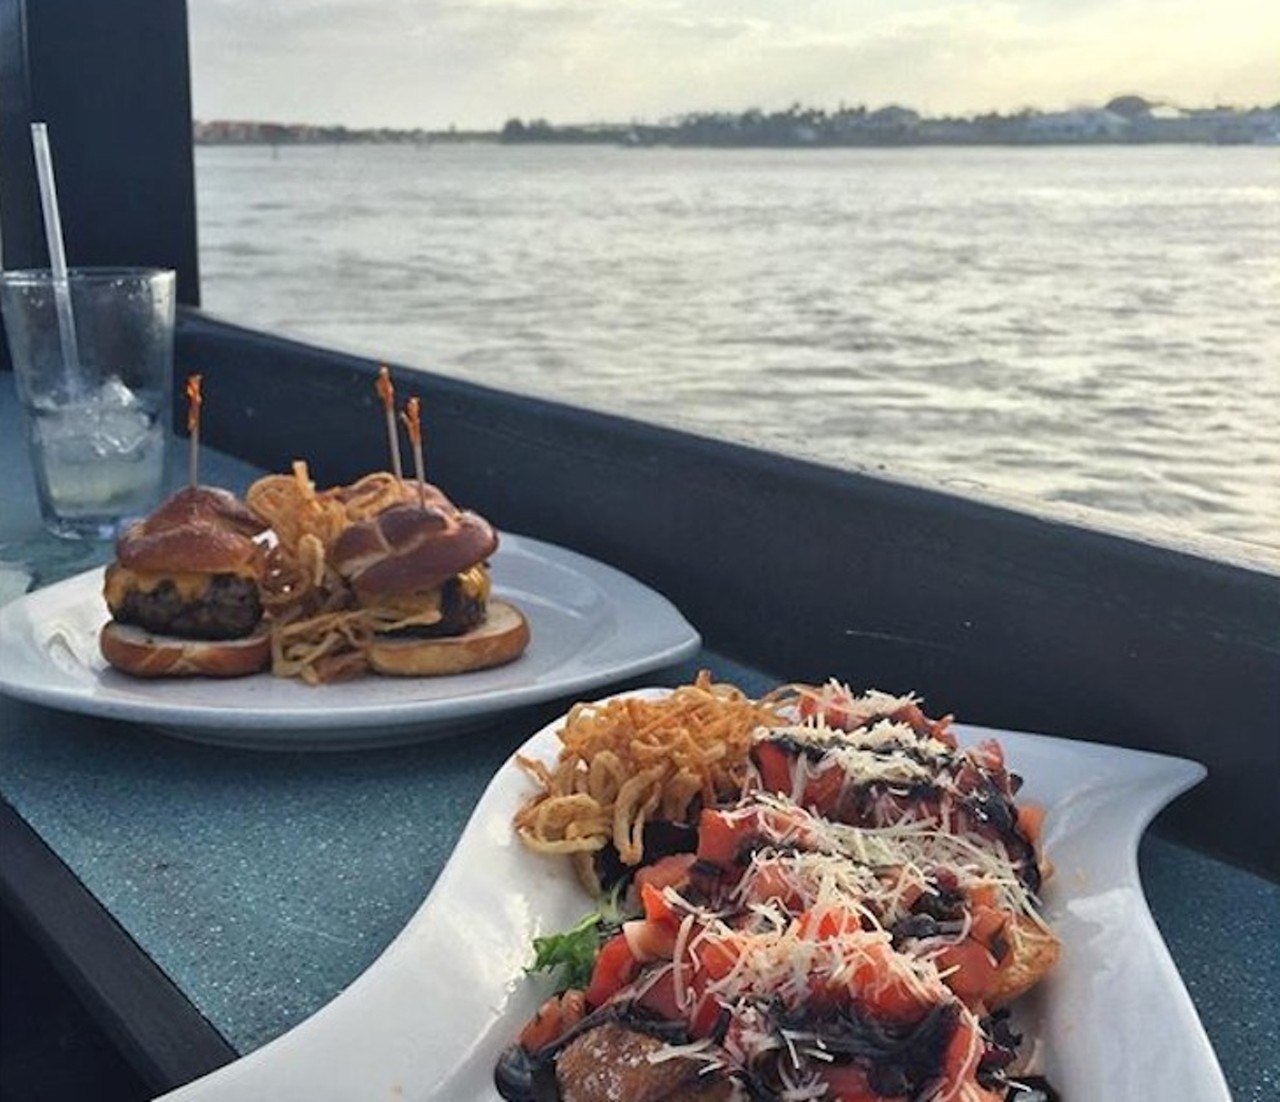 Grille At Riverview
101 Flagler Ave., New Smyrna Beach | 386-428-1865
Distance from Orlando: 1 hour, 3 minutes
The best way to spend a sophisticated summer night on the waterfront? Dinner, dancing and dolphins. 
Photo via lifessweetjourney/Instagram